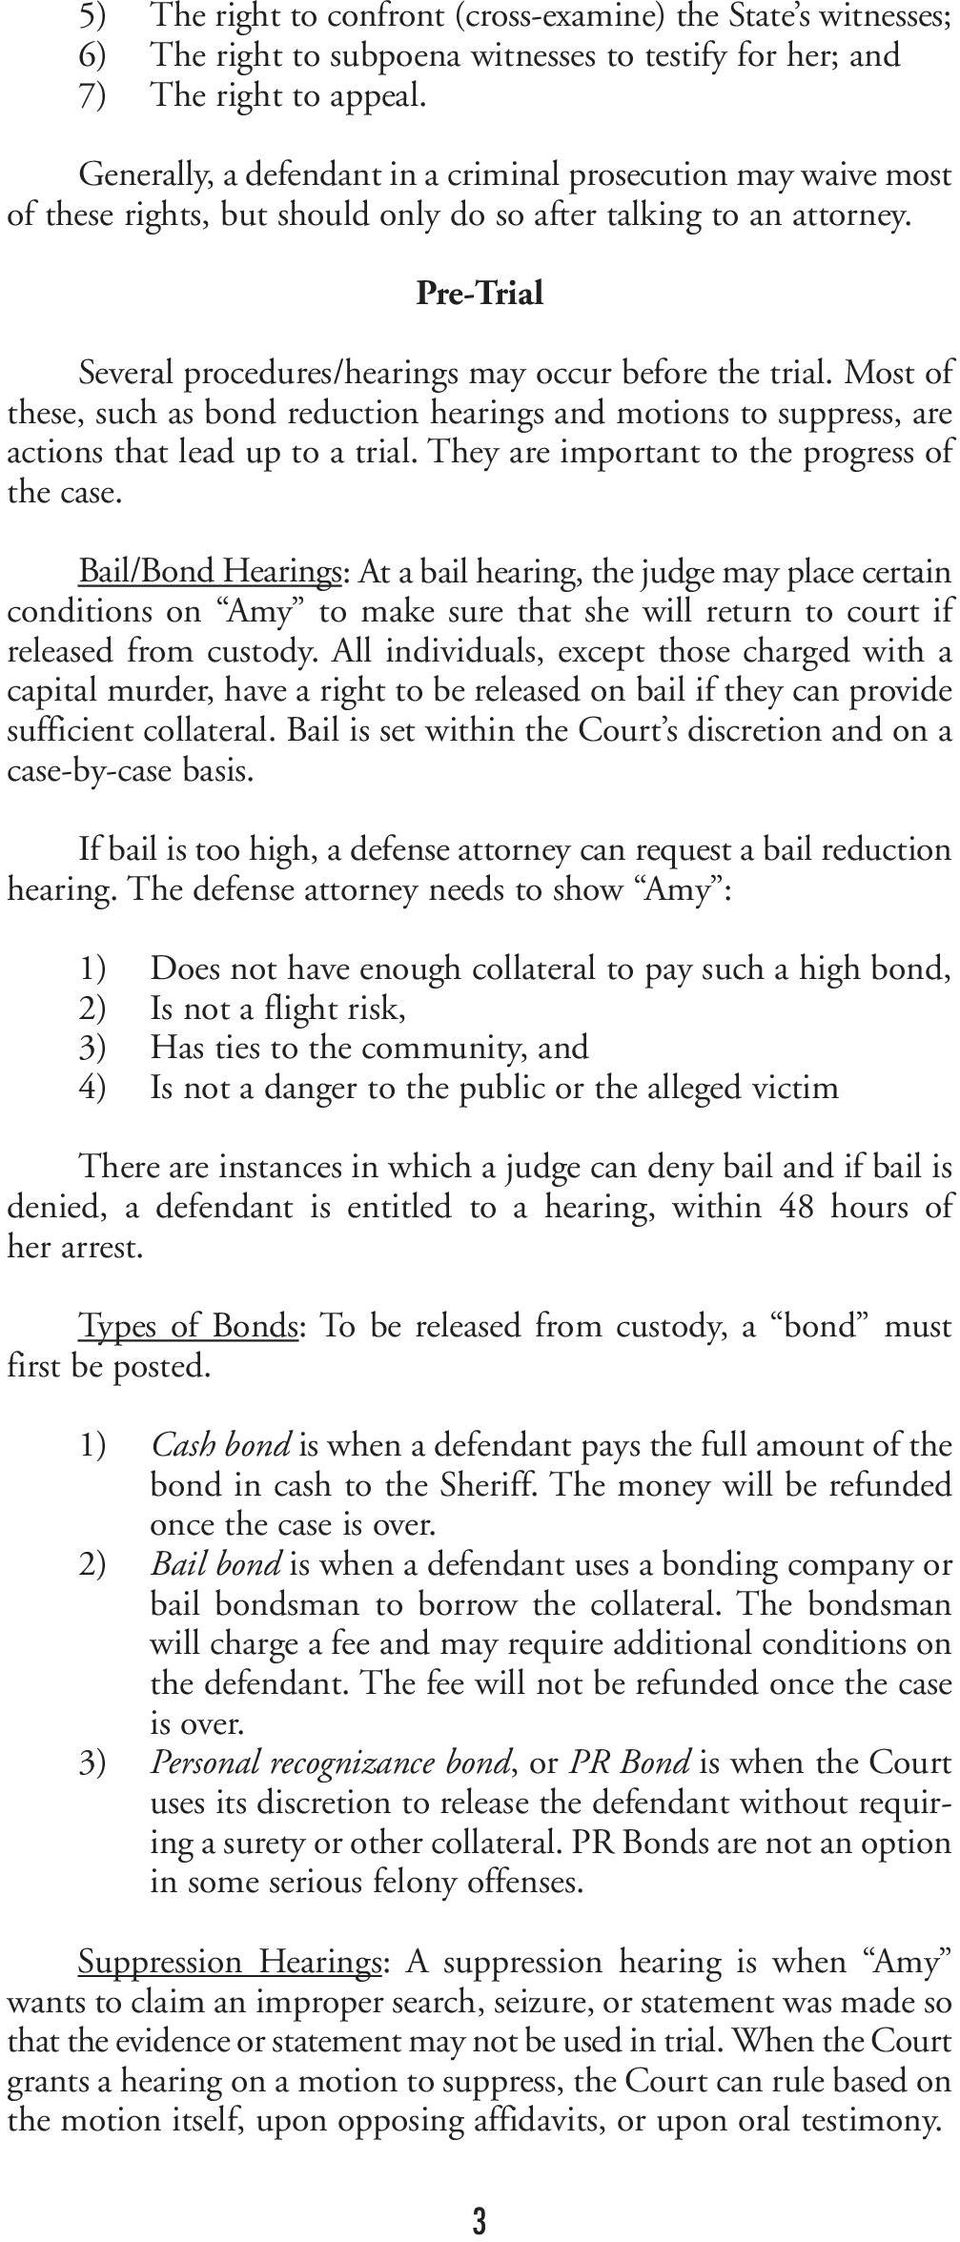 Most of these, such as bond reduction hearings and motions to suppress, are actions that lead up to a trial. They are important to the progress of the case.